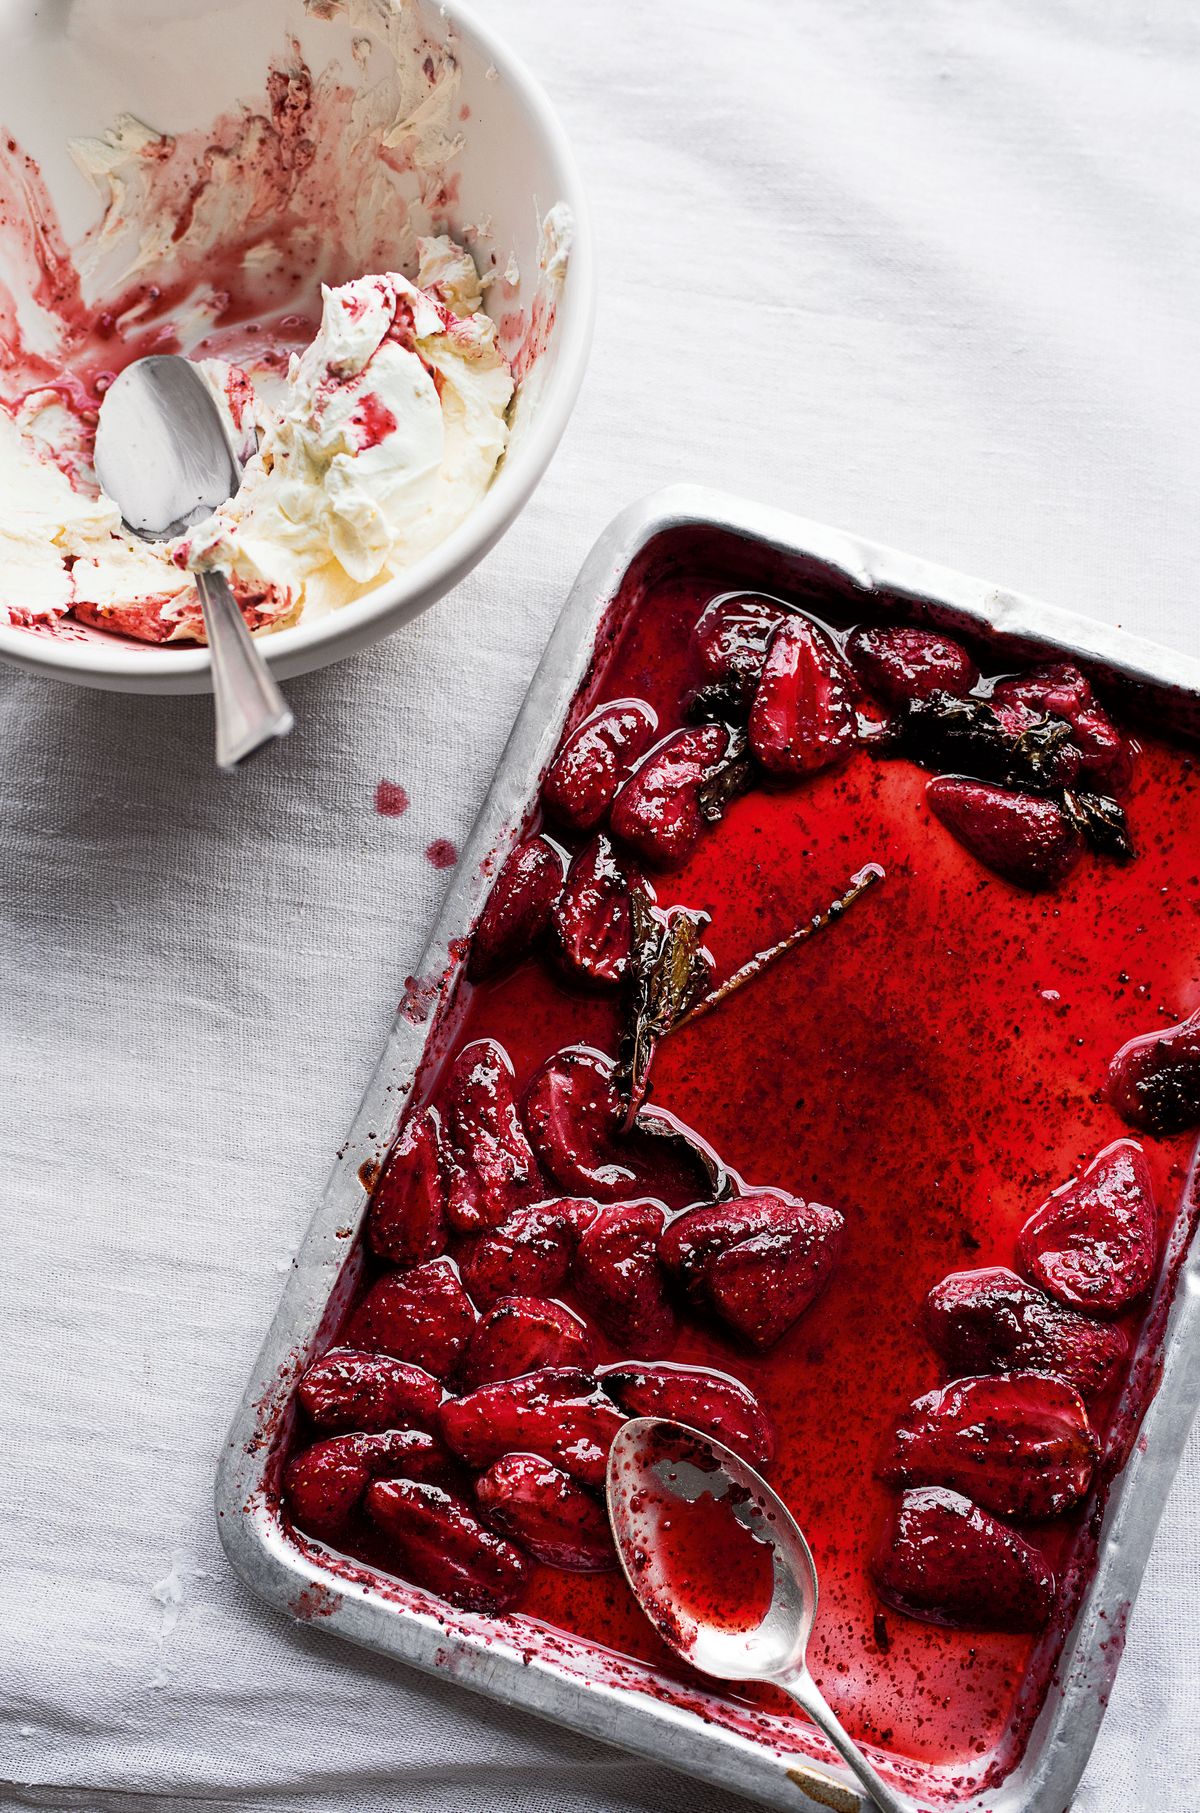 Ottolenghi’s Sumac-roasted Strawberries with Yoghurt Cream